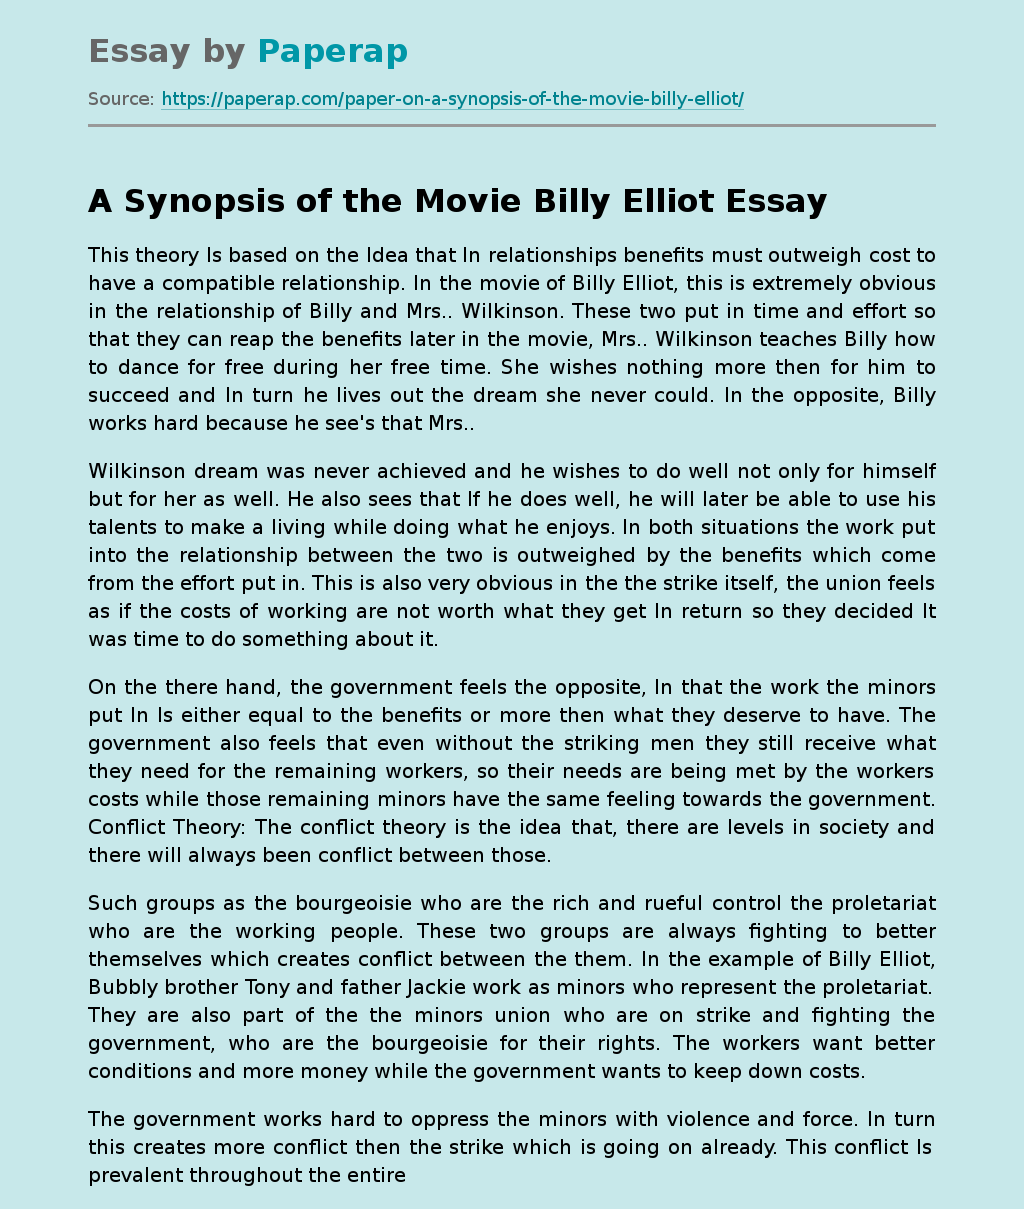 A Synopsis of the Movie Billy Elliot